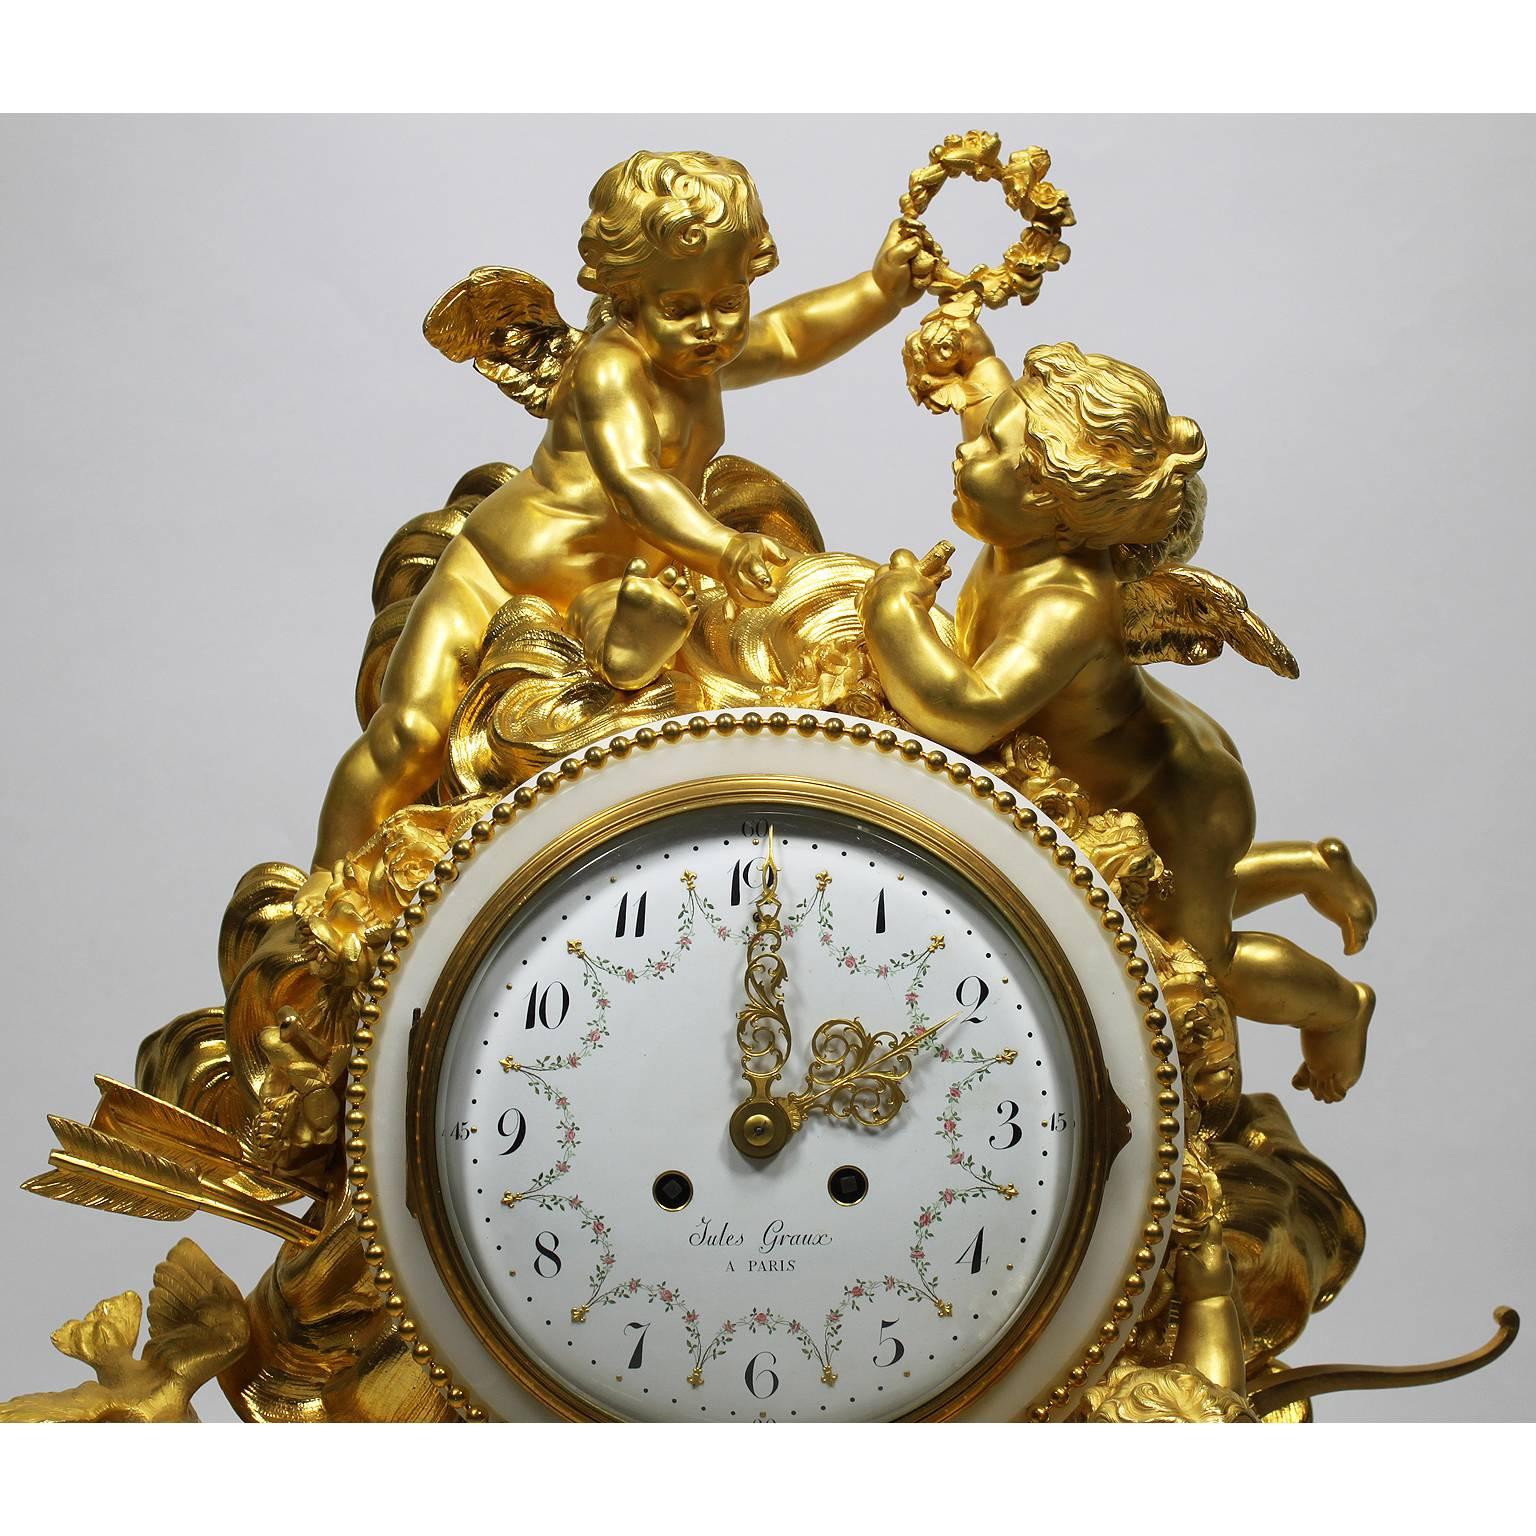 An important and palatial French Louis XV style 19th century gilt bronze and white marble mantel clock attributed to Alfred-Emmanuel-Louis Beurdeley, the casting and gilding by Jules Graux, Paris, The Movement by Japy Freres & Cie. The large and